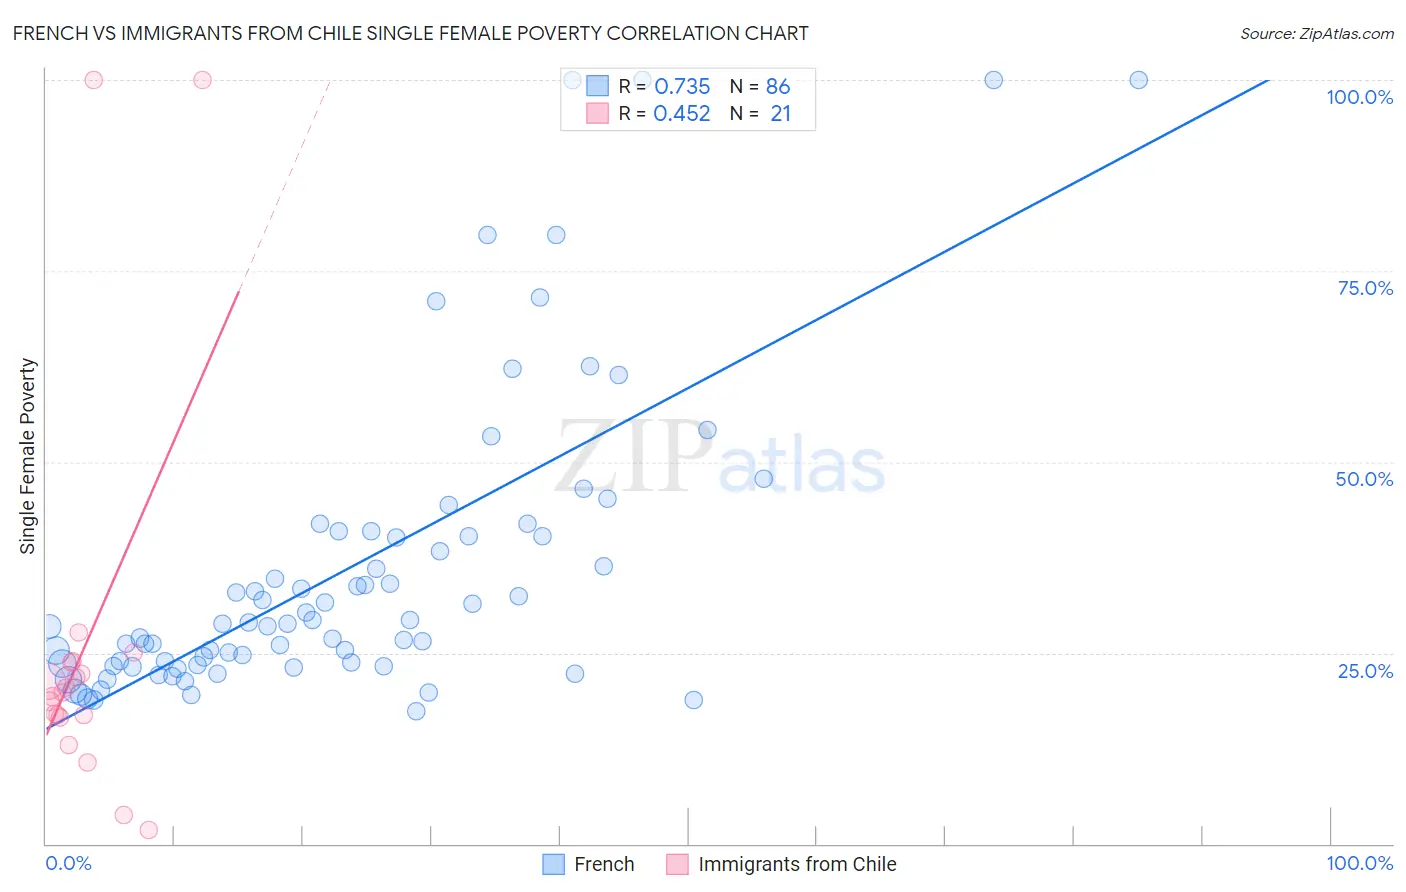 French vs Immigrants from Chile Single Female Poverty